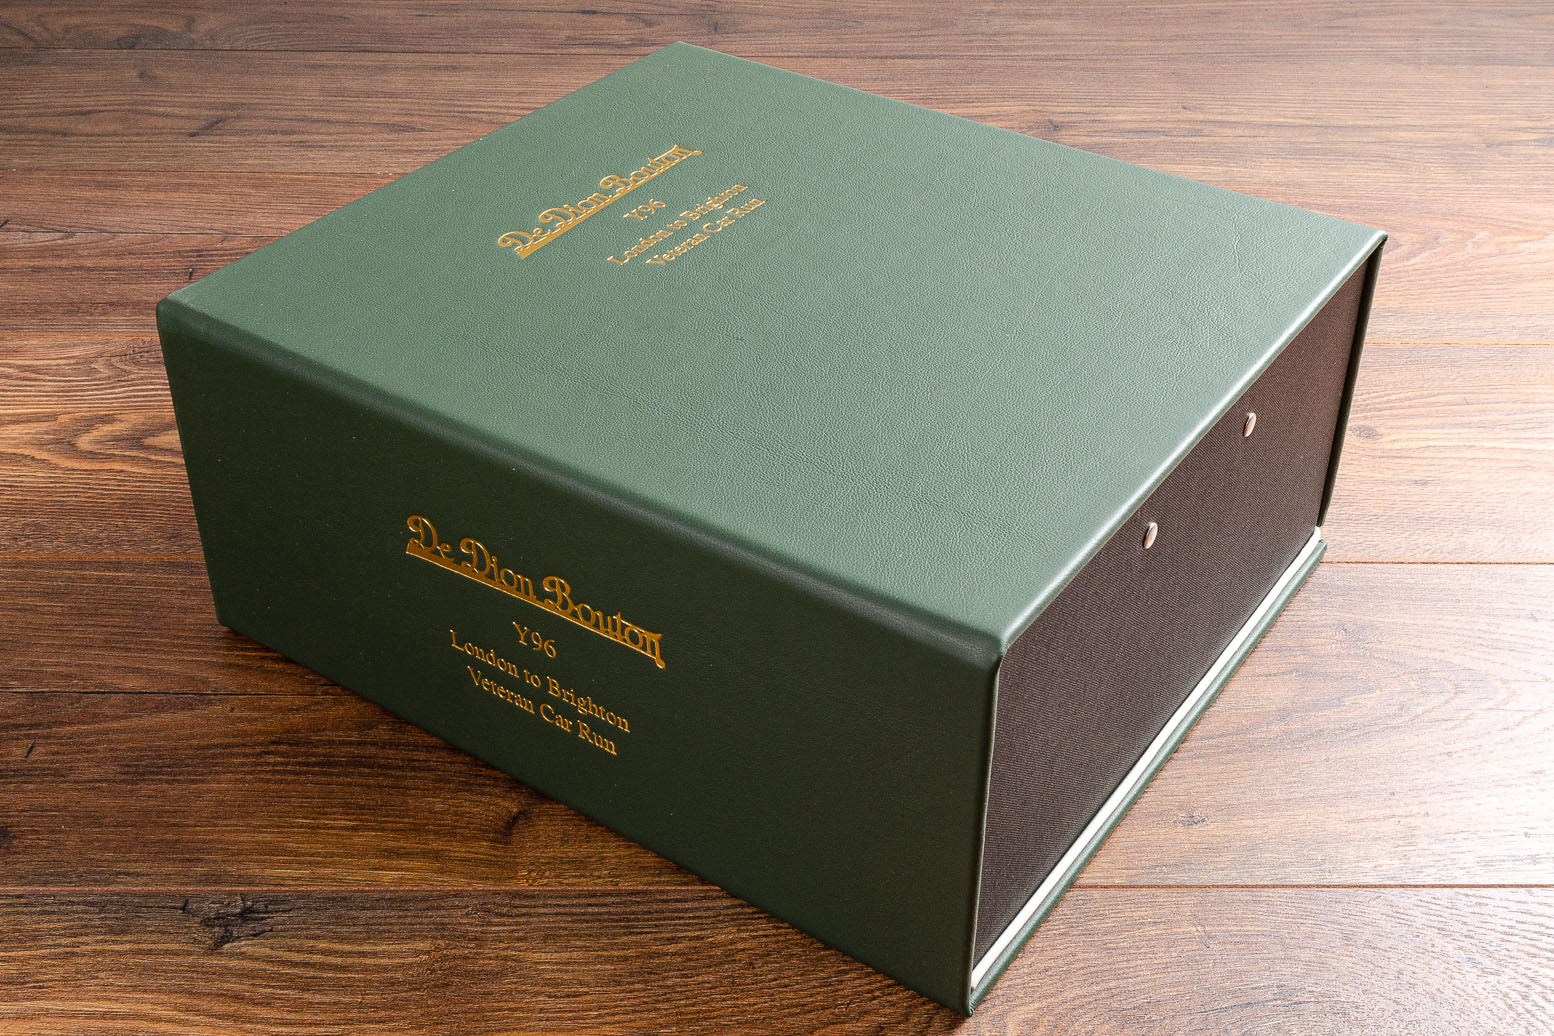 Gold embossed vehicle document box